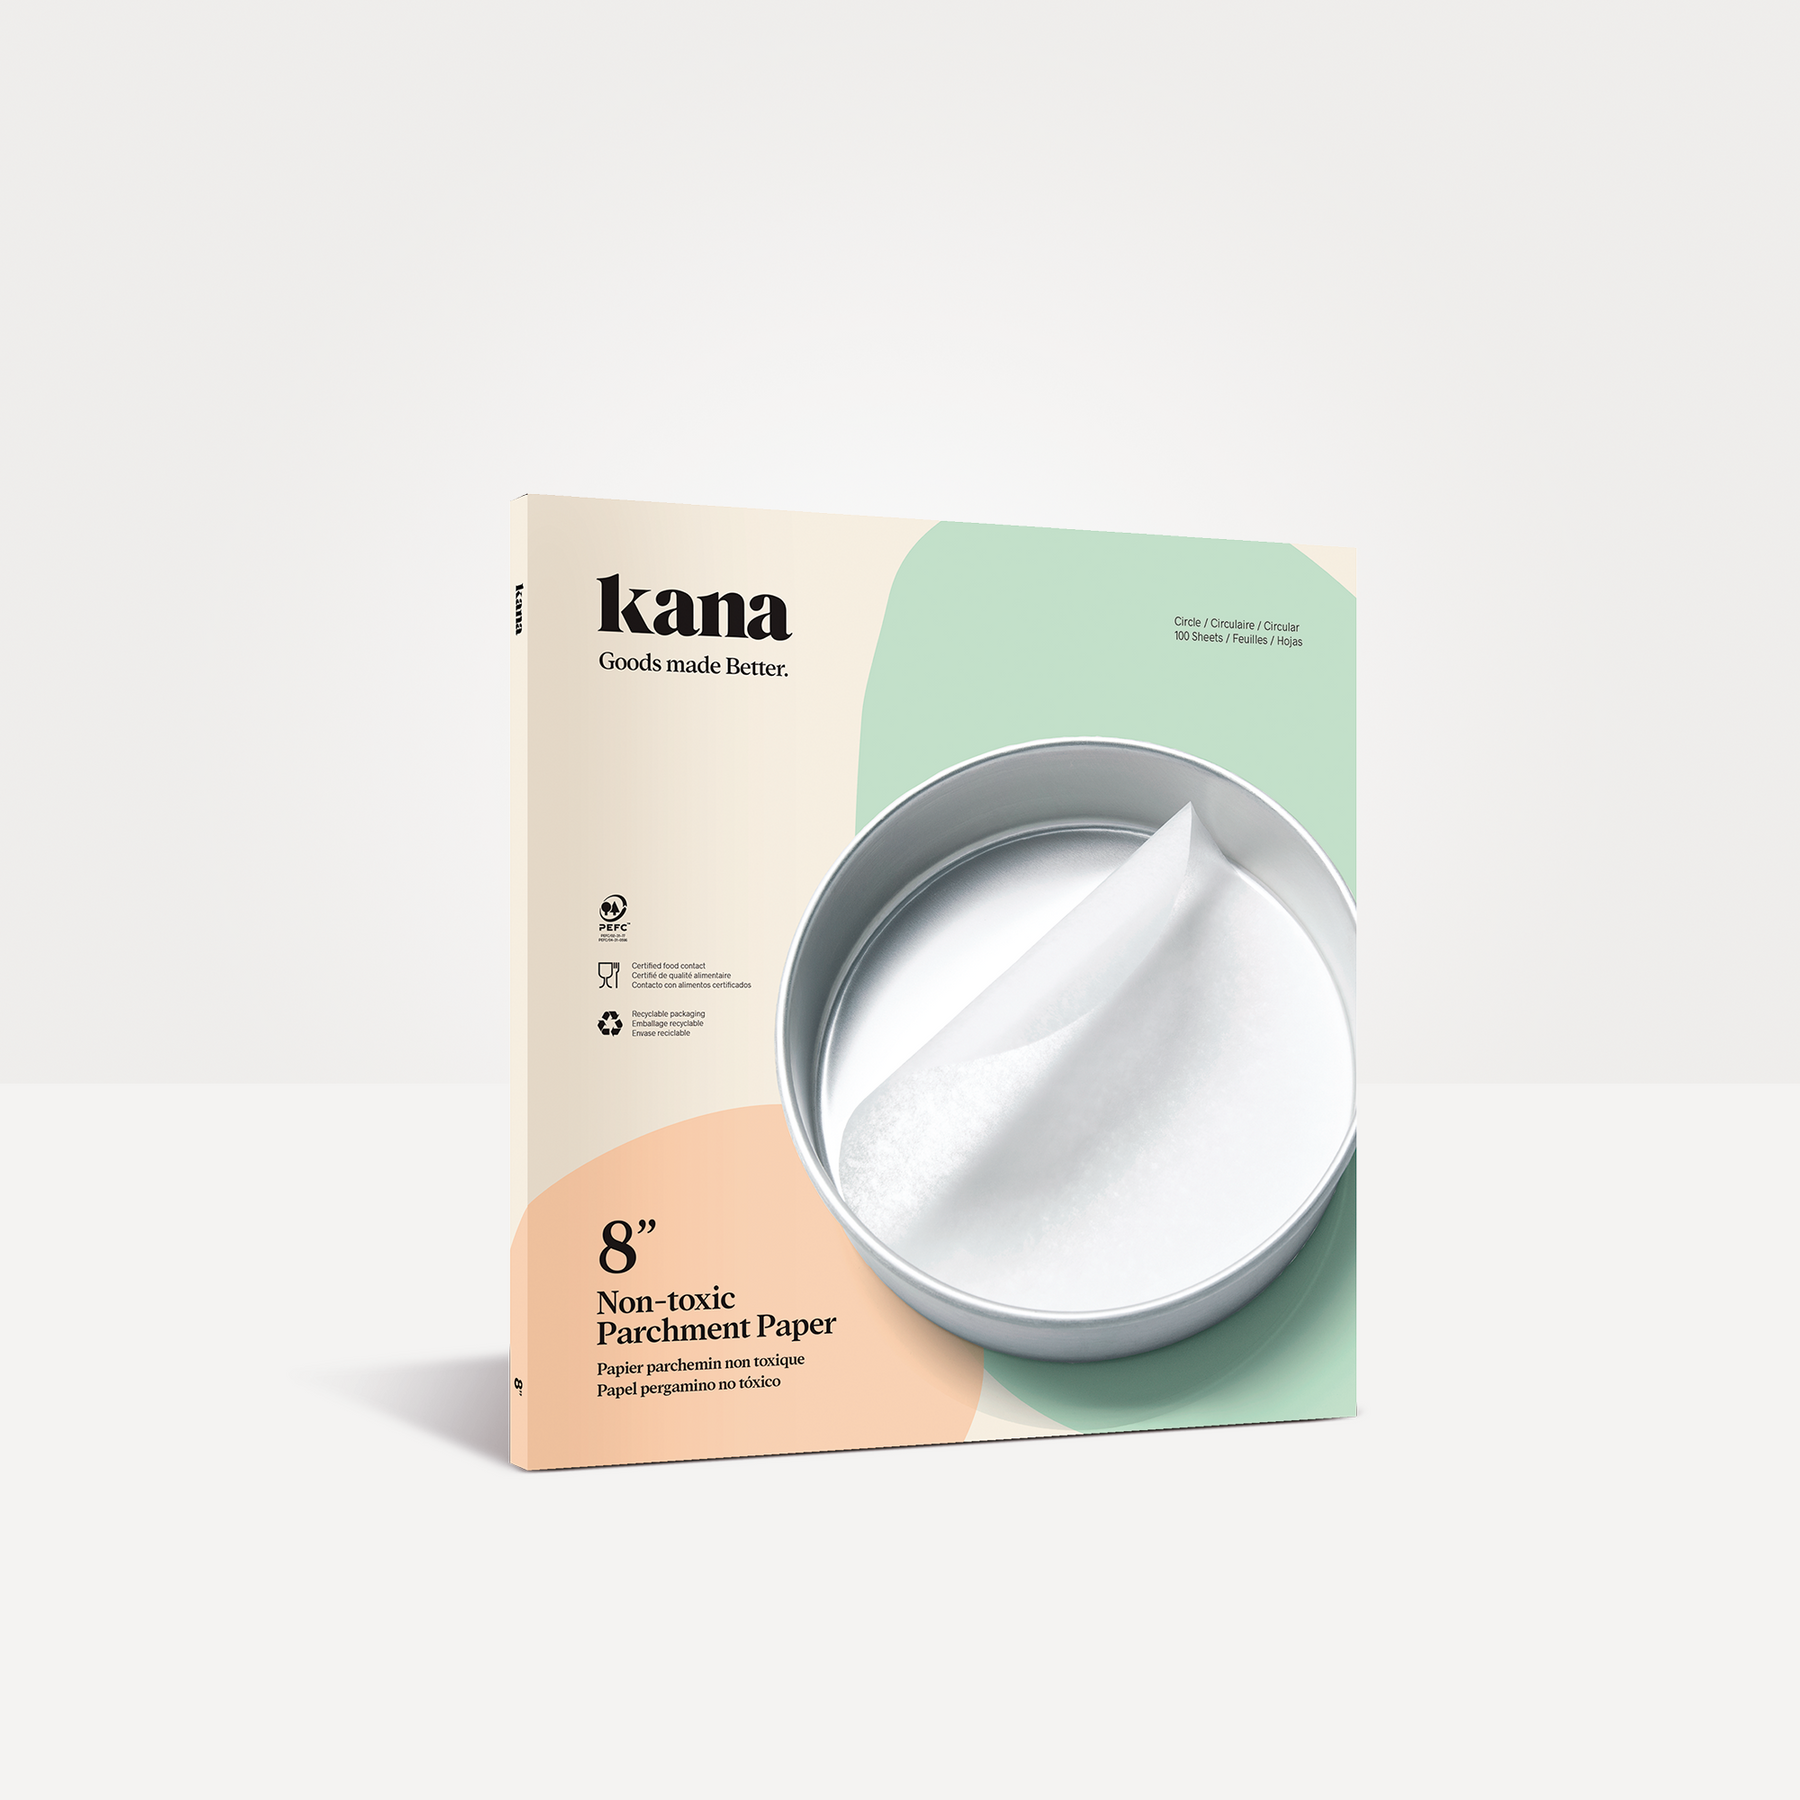 Parchment Paper Sheets by Kana  Pre cut, compostable, and  sustainably-sourced